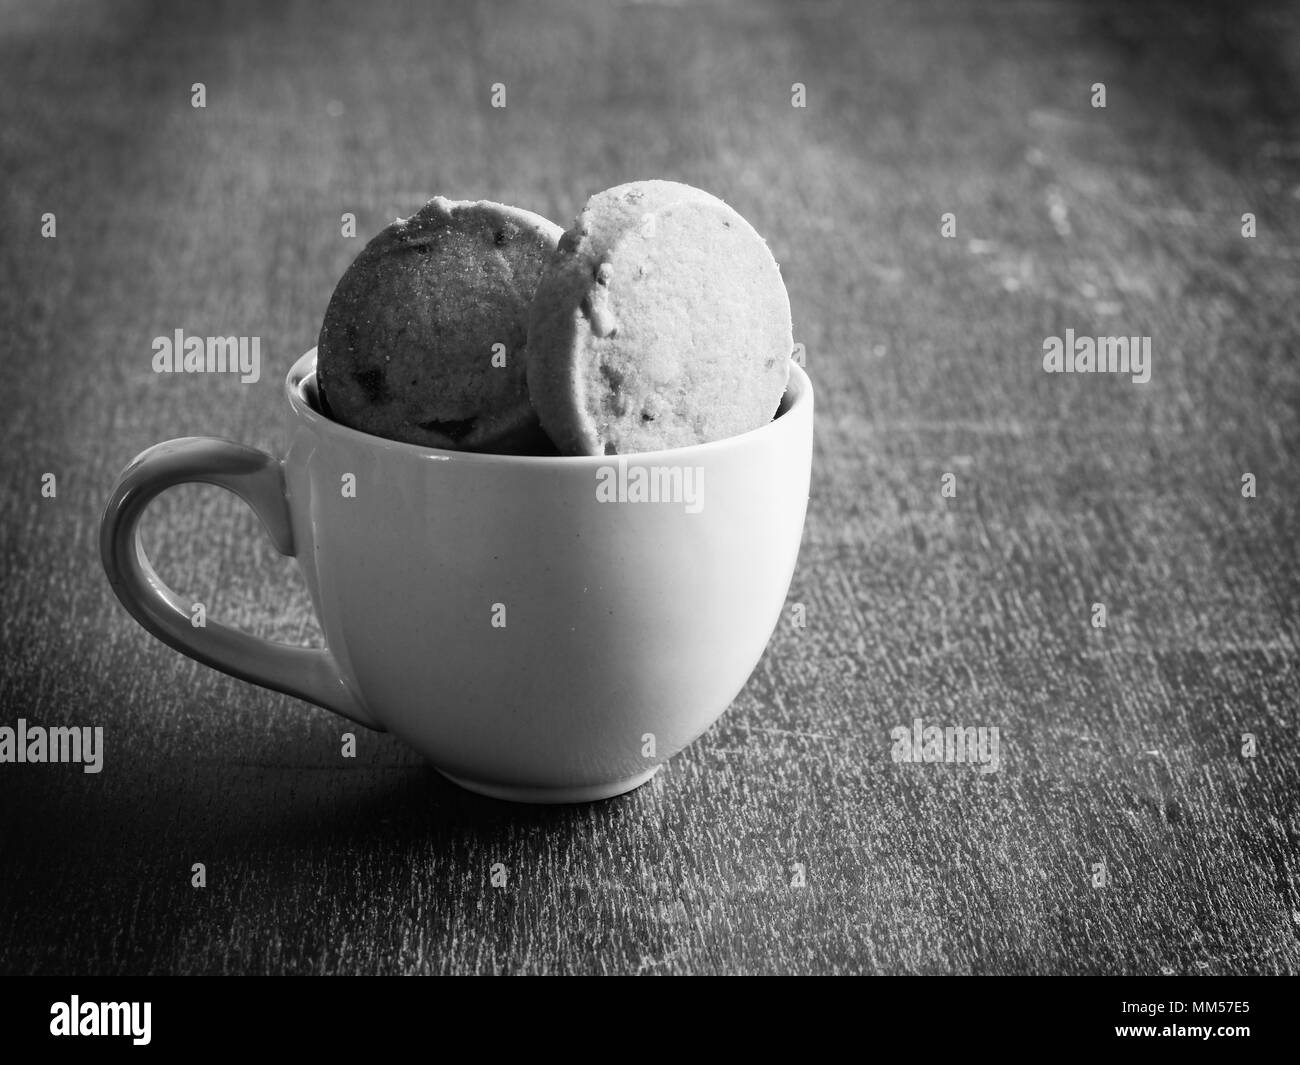 black and white cookies Stock Photo